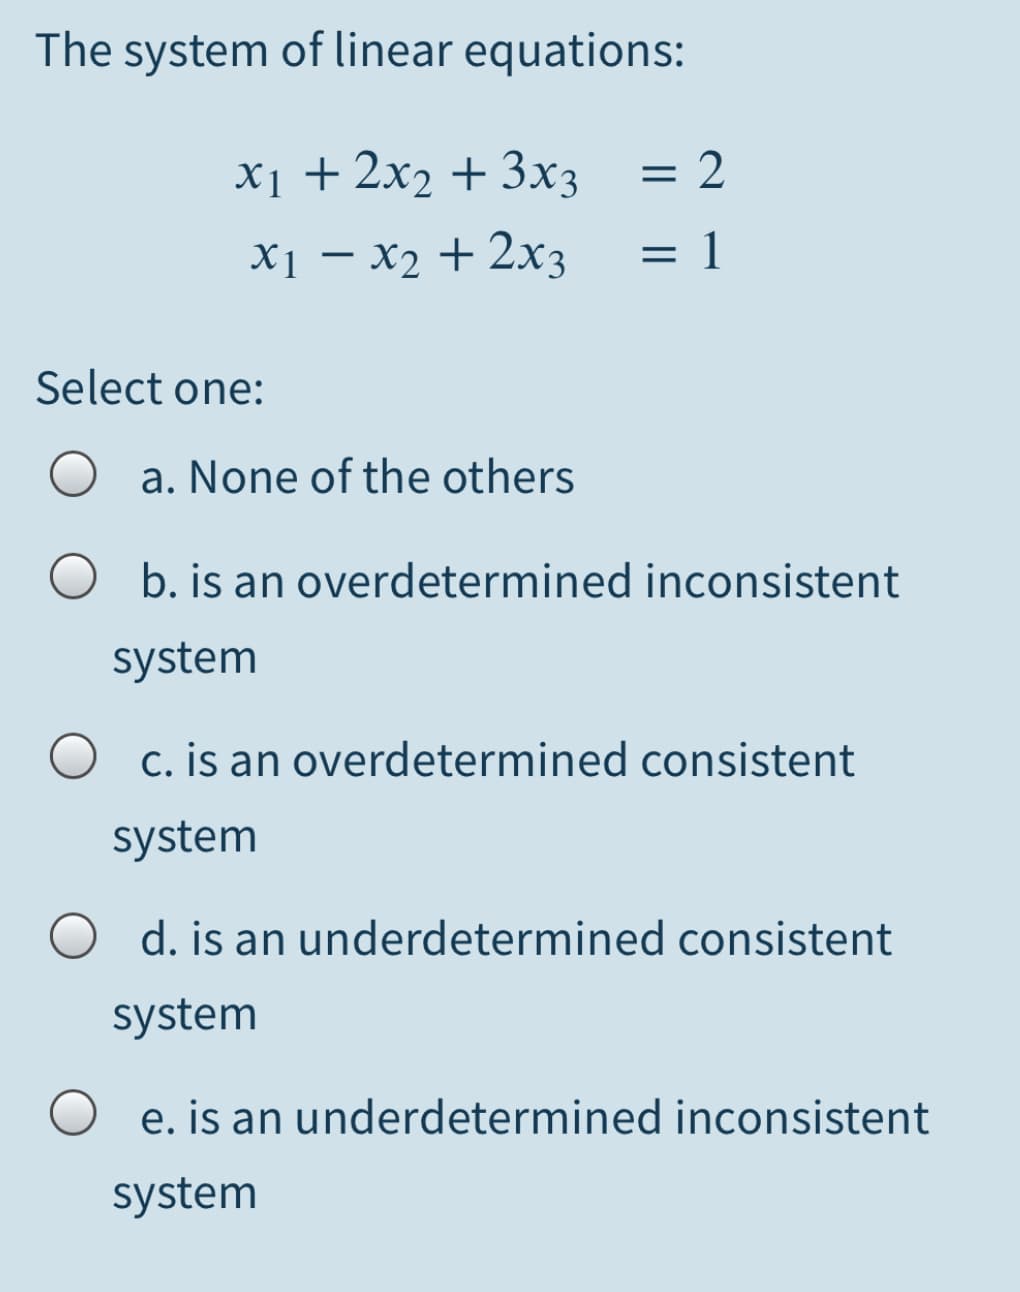 The system of linear equations:
X1 + 2x2 + 3x3
= 2.
X1 – x2 + 2x3
1
Select one:
a. None of the others
b. is an overdetermined inconsistent
system
O c. is an overdetermined consistent
system
d. is an underdetermined consistent
system
e. is an underdetermined inconsistent
system
